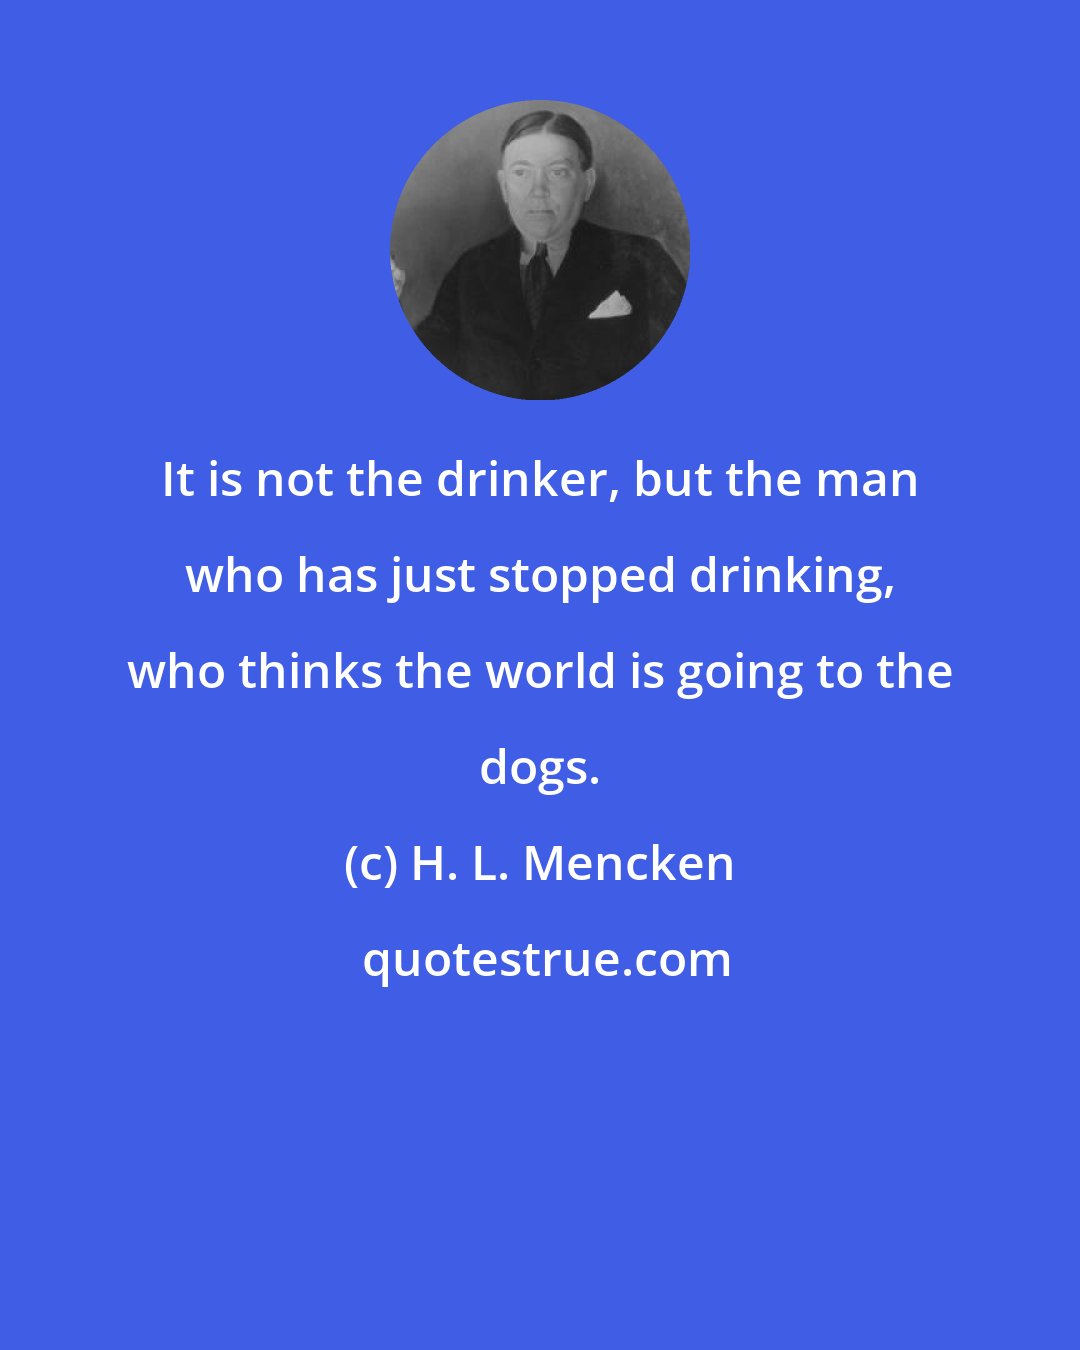 H. L. Mencken: It is not the drinker, but the man who has just stopped drinking, who thinks the world is going to the dogs.